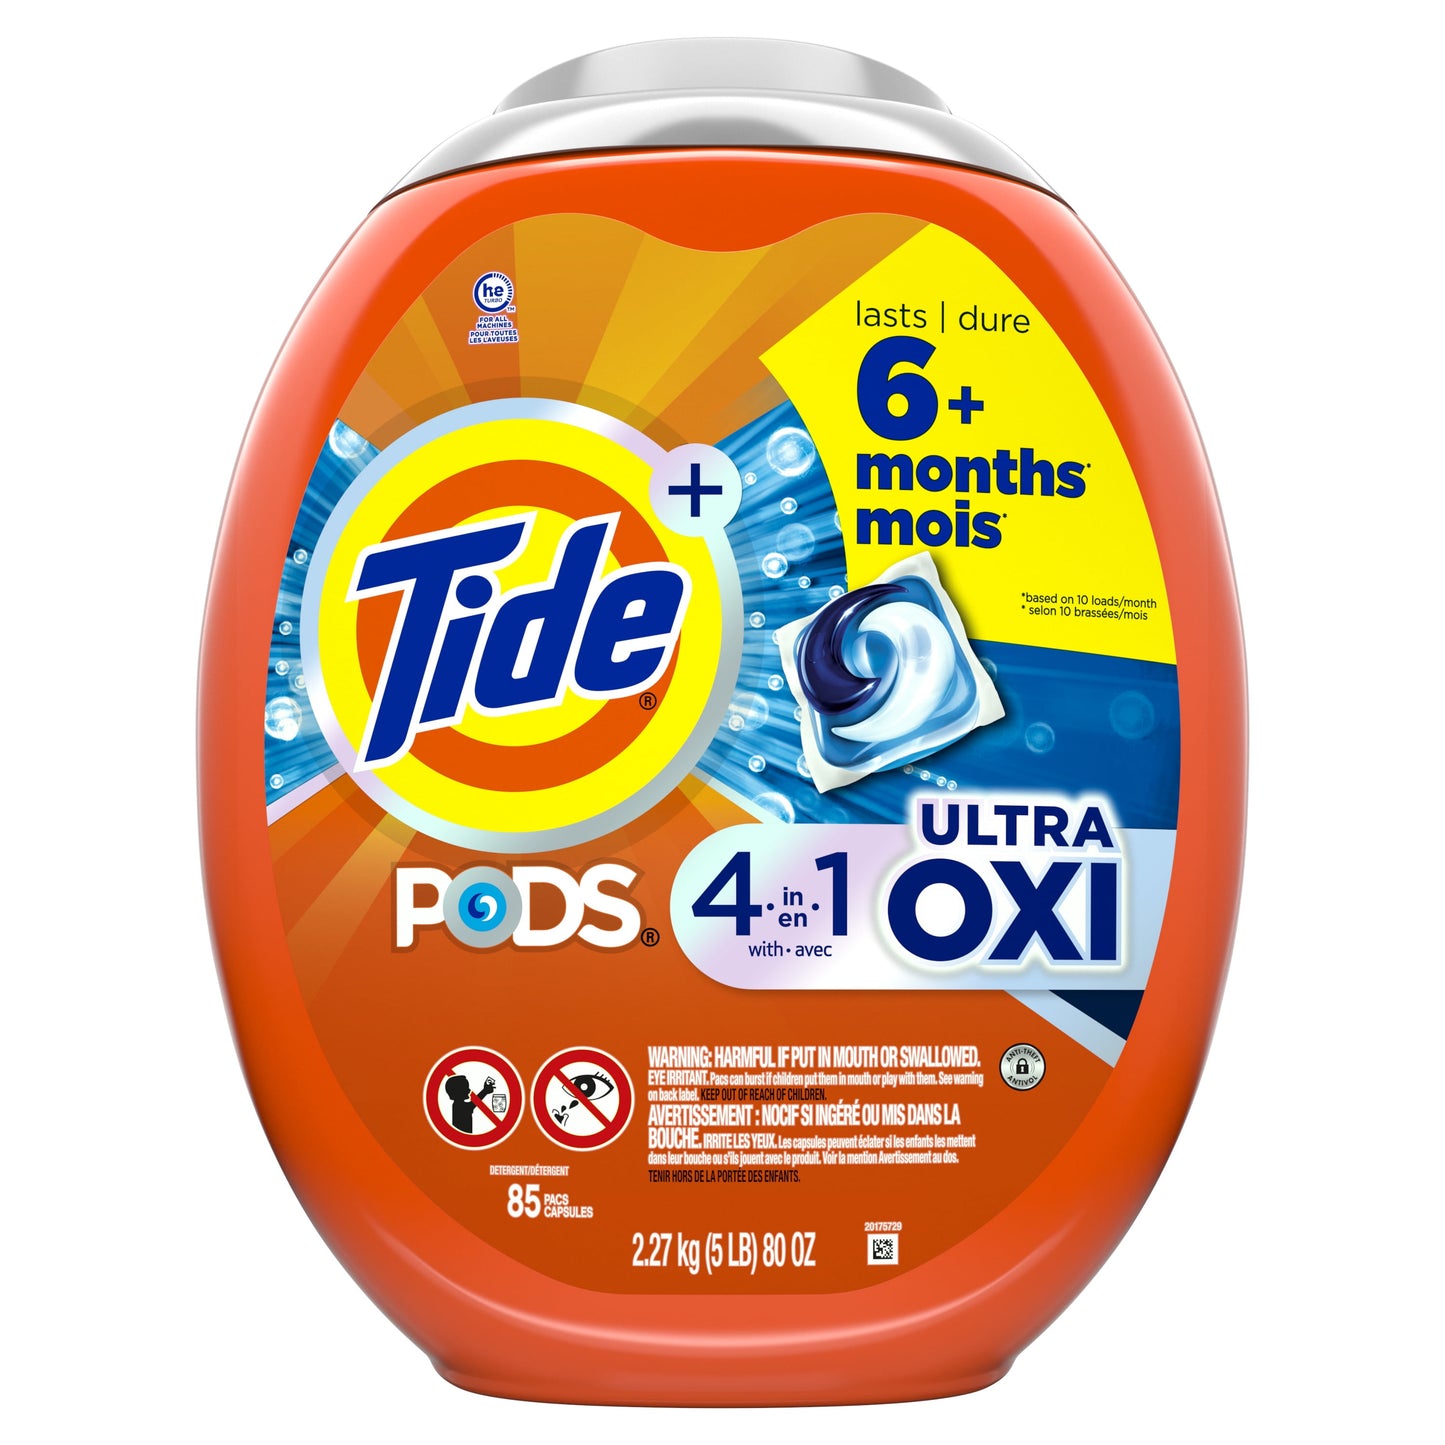 Tide Pods Laundry Detergent Soap Packs with Ultra Oxi, 85 Ct